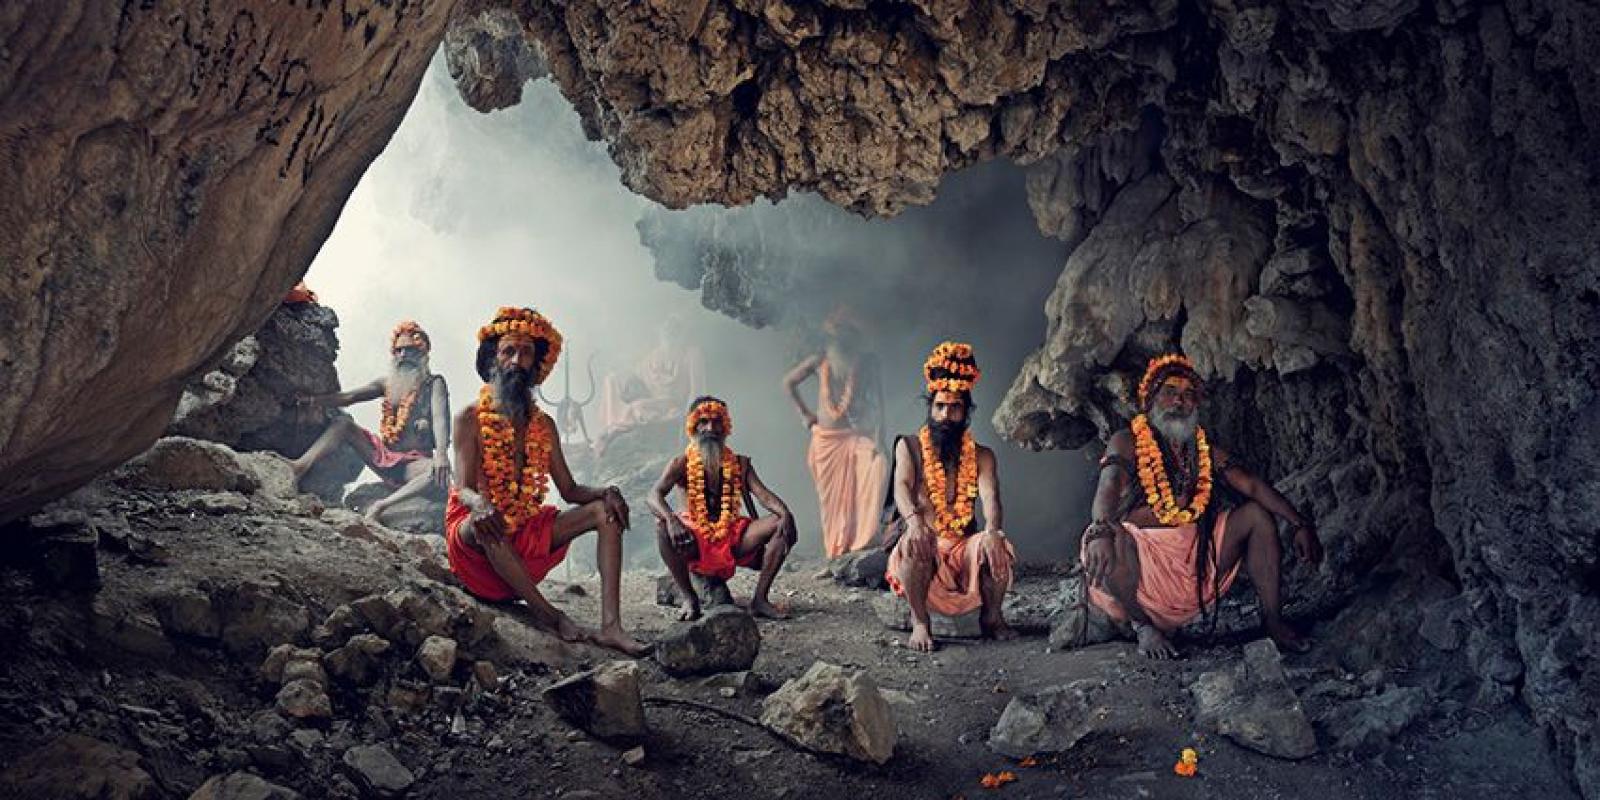 XXIV 1 Cave, Sadhus, Haridwar

Sadhus (meaning ‘good men’) are devoutly religious Hindus living throughout India. They wear orange clothes representing the colour of the fire in which they have burned all their possessions to be symbolically reborn